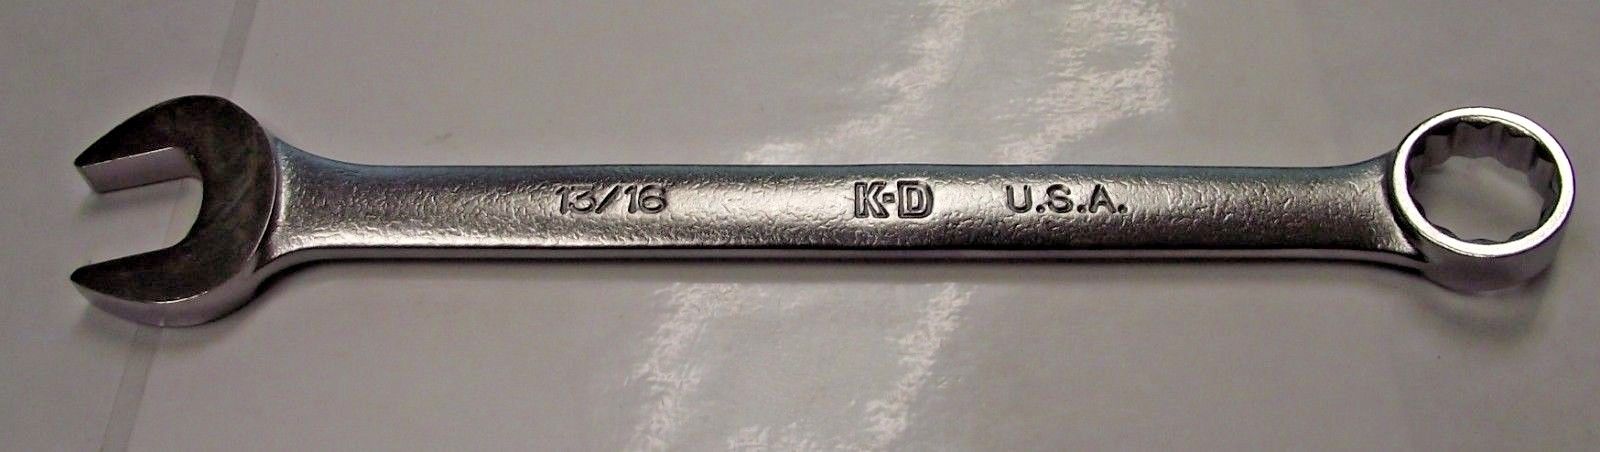 KD Tools 63126 13/16" Combination Wrench 12 Point USA